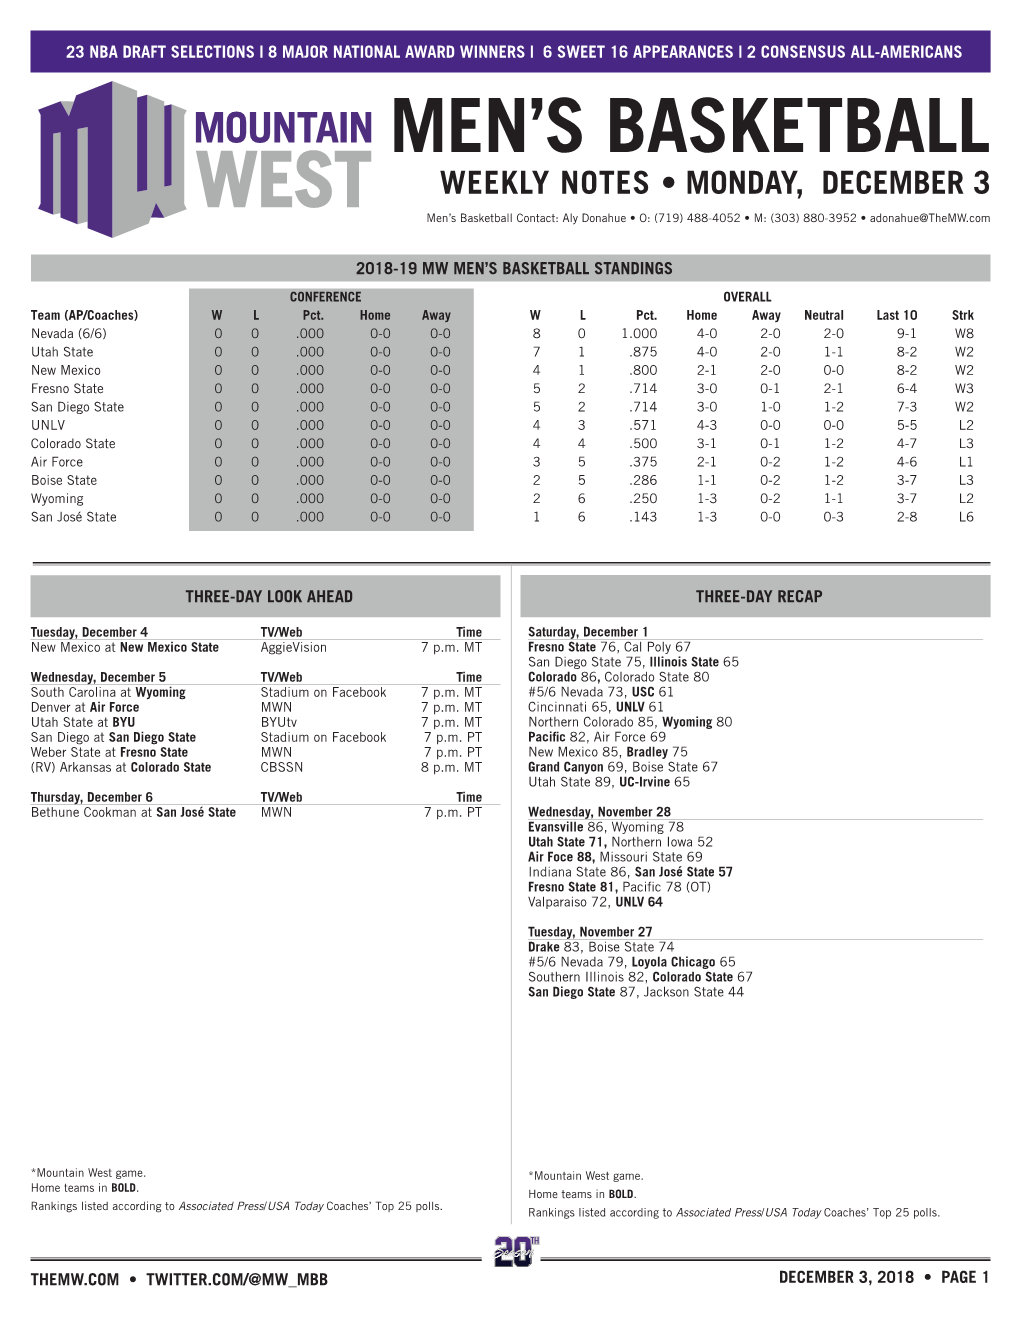 Men's Basketball CONFERENCE BASKETBALL STATISTICS Through Games of Dec 01, 2018 (All Games)